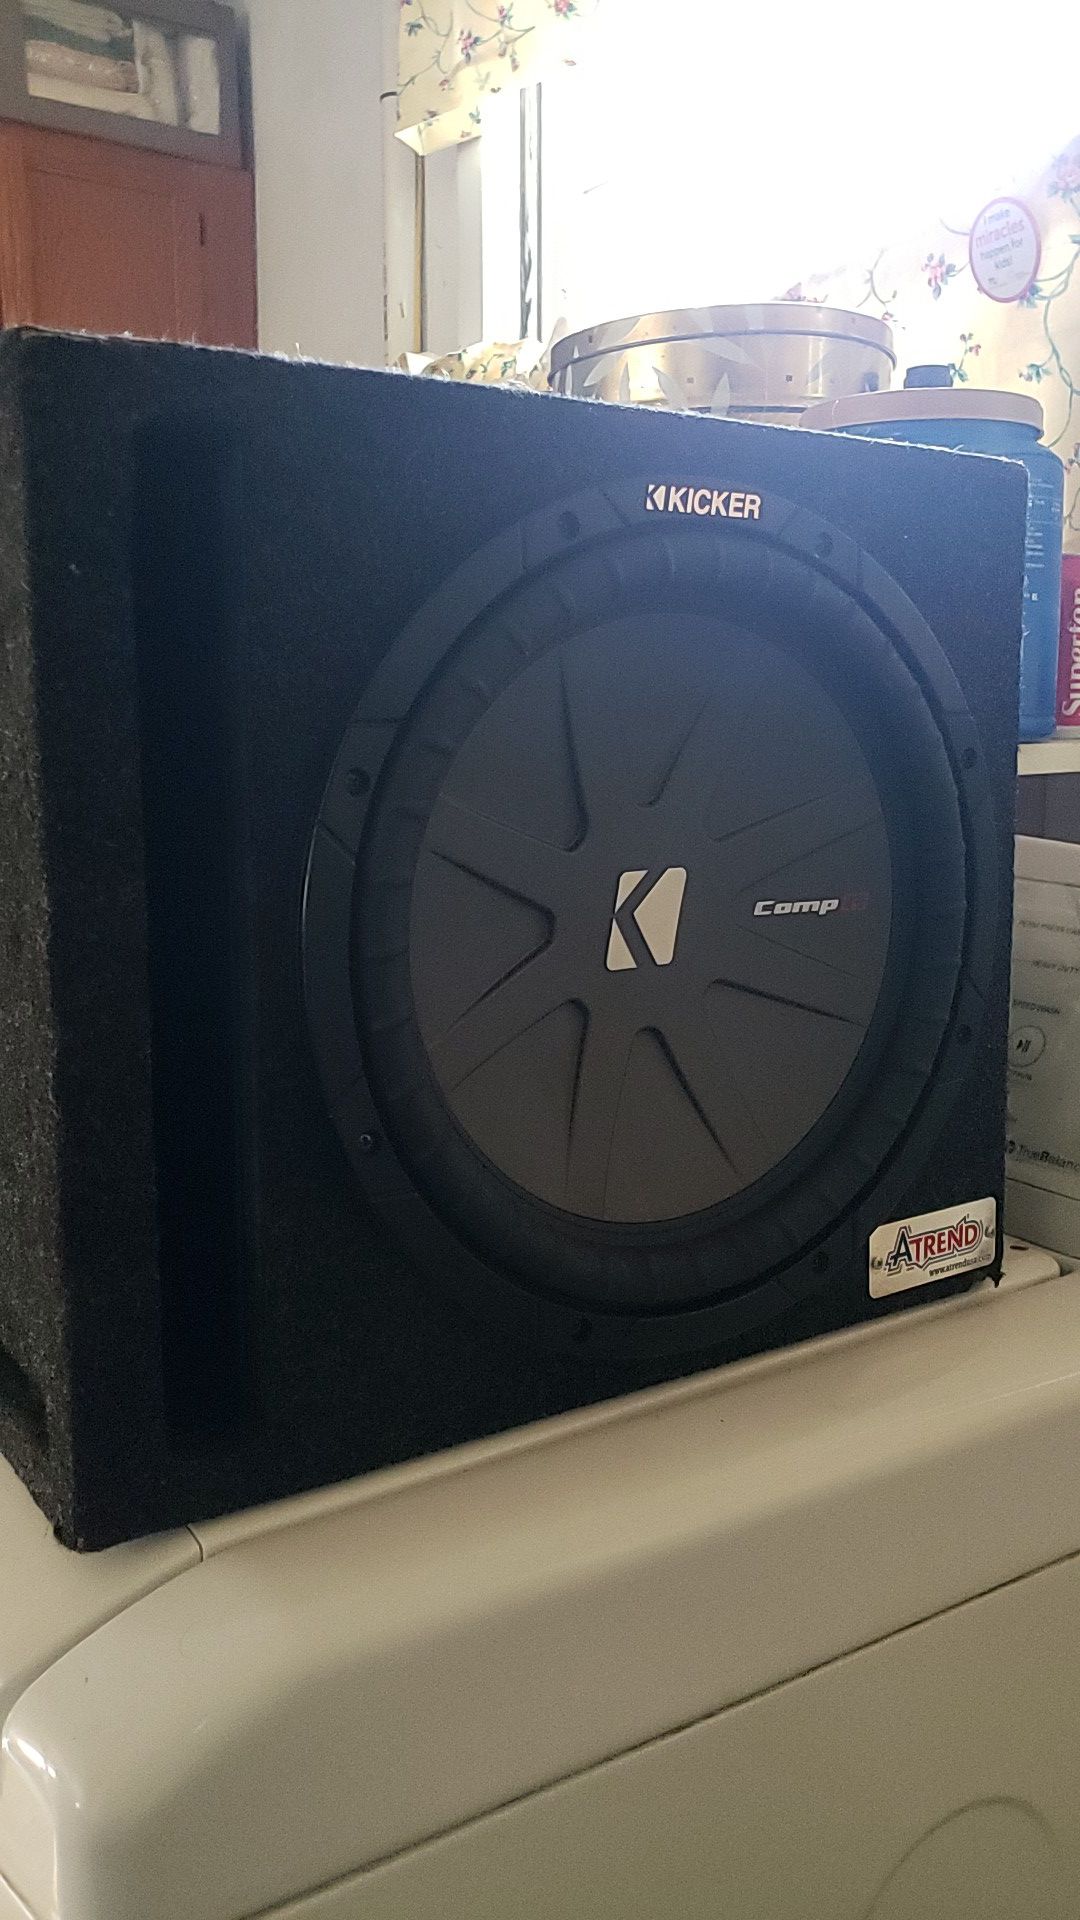 Kicker 40CWR102 CompR Series 10" Subwoofer w/ Dual 2-Ohm Voice Coils - Ported in Single-Vent Box